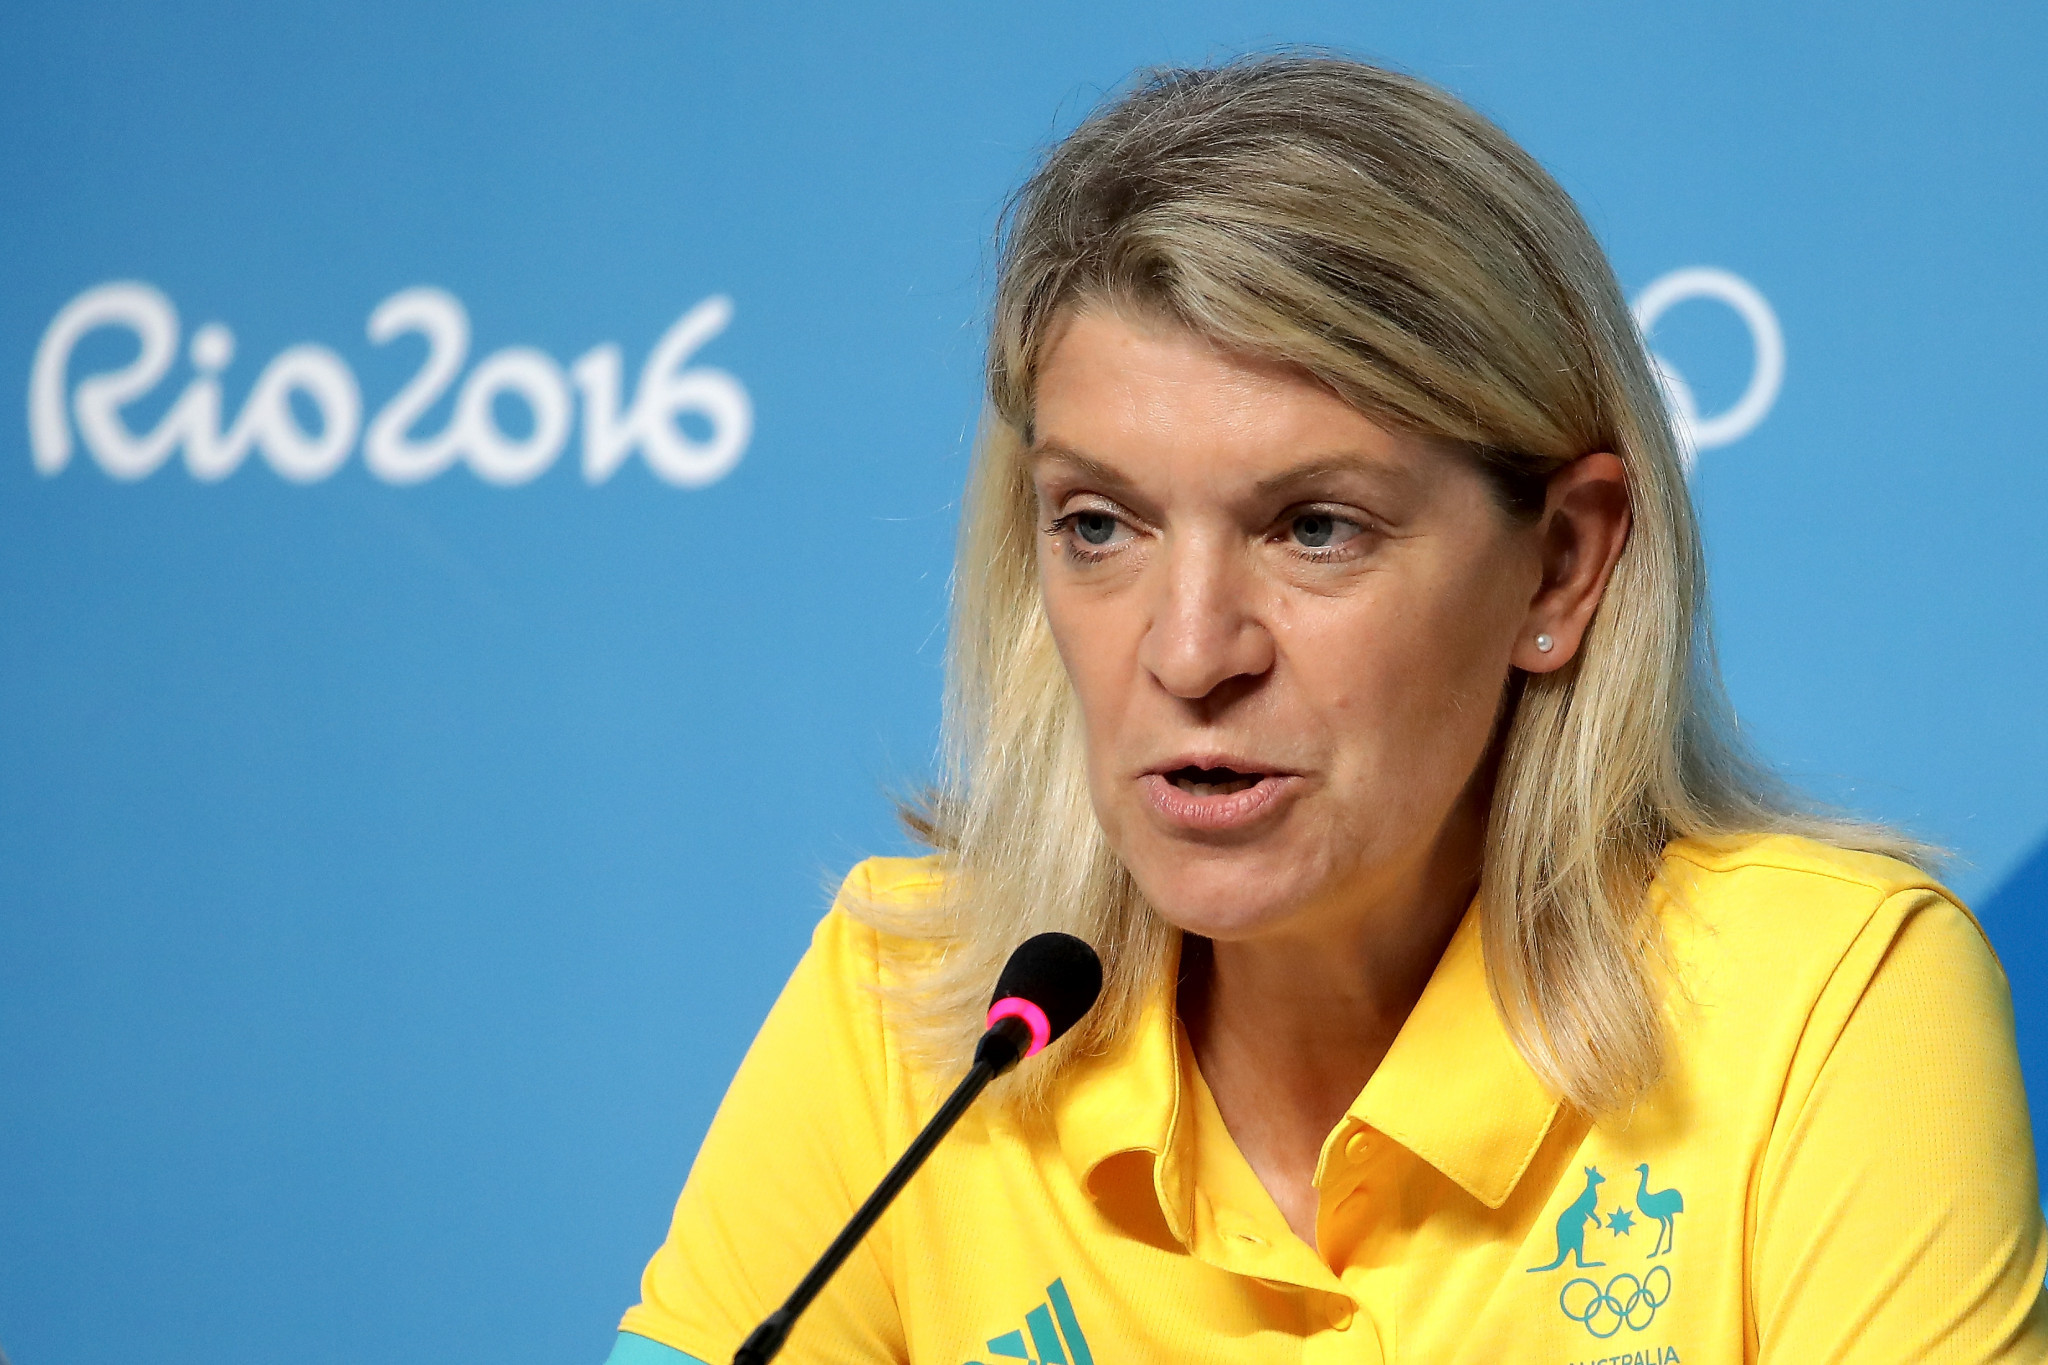 Kitty Chiller served as Australia's Chef de Mission at the Rio 2016 Olympic Games ©Getty Images